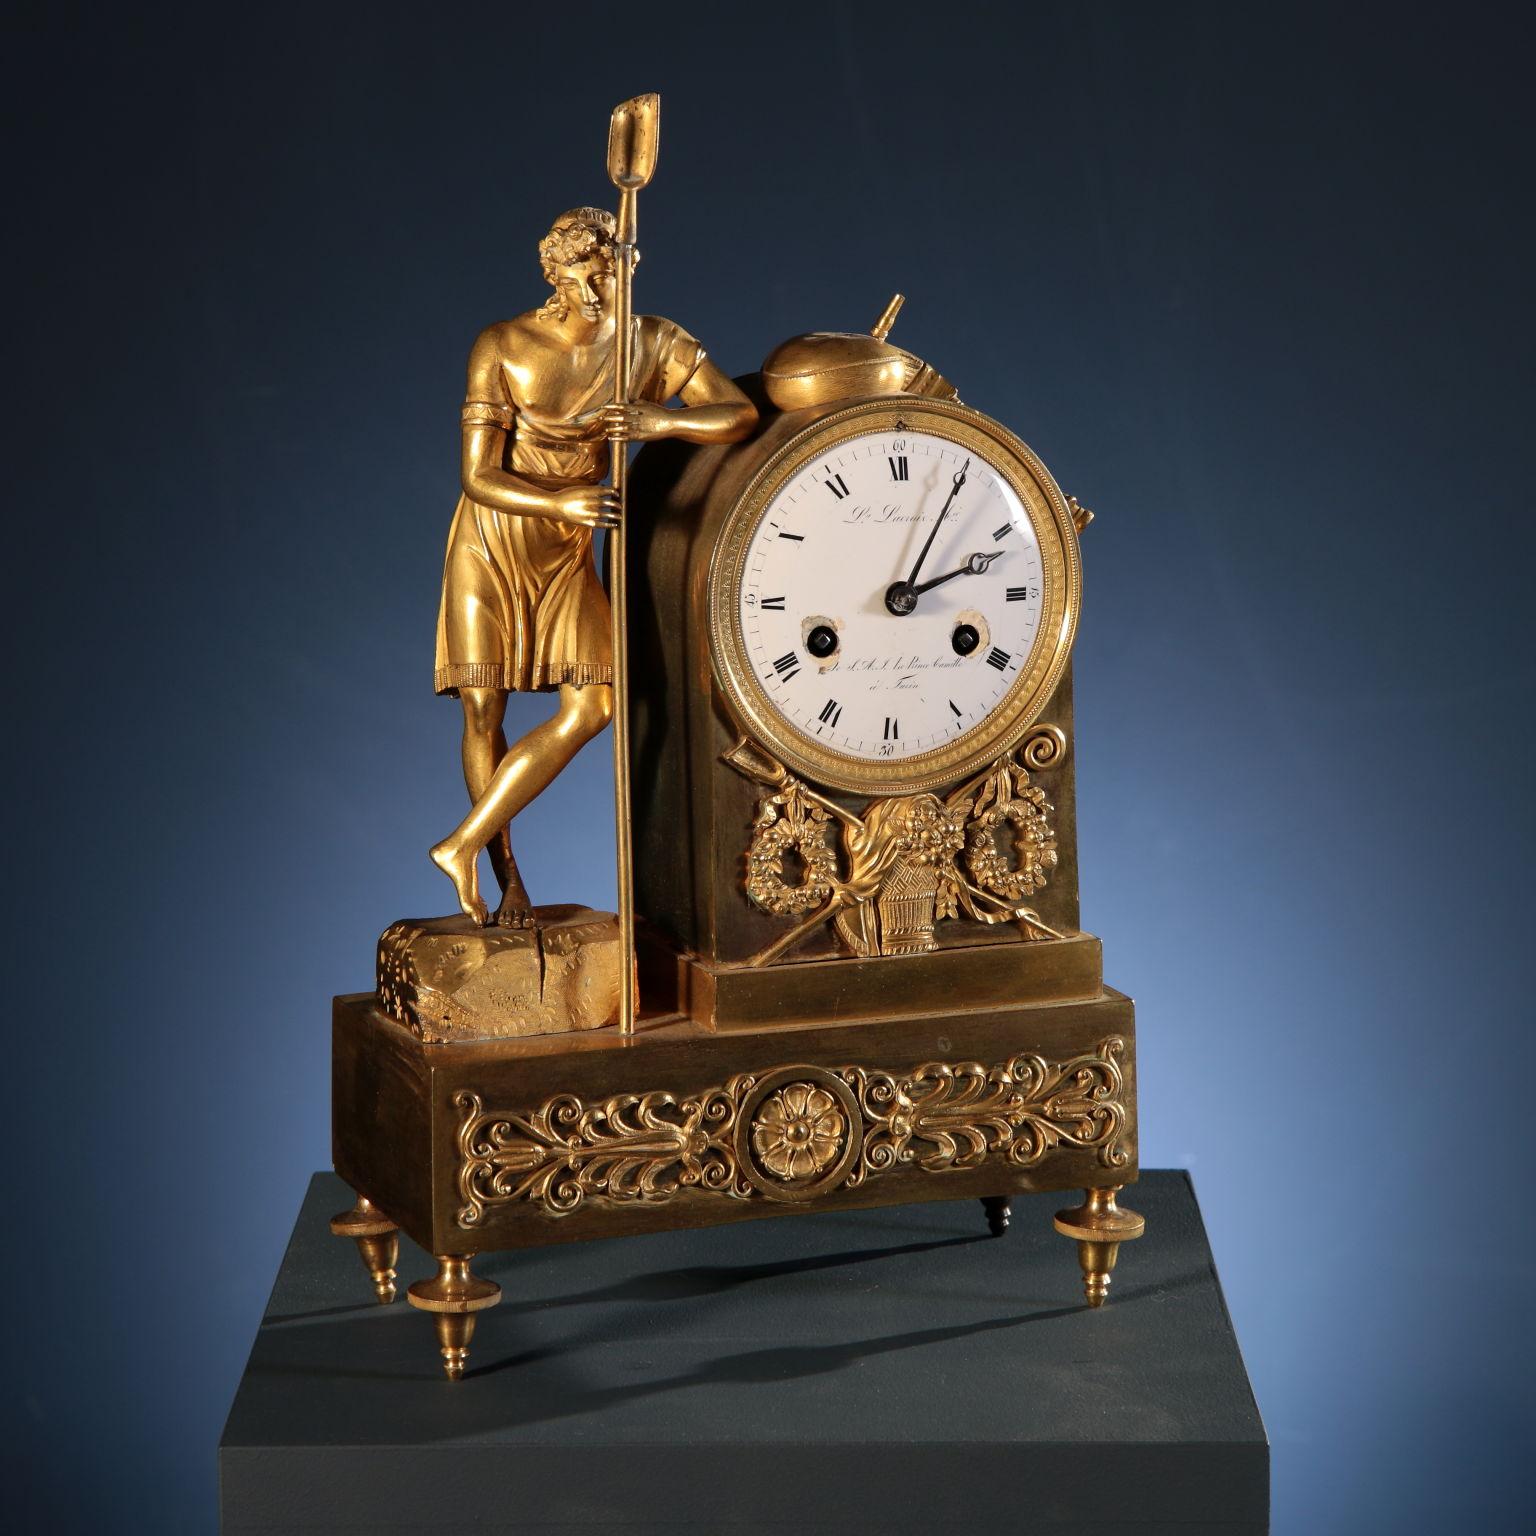 The gilt bronze mantel clock has a base decorated on the front with leafy phytomorphic motifs and a central floral element, and is supported by elaborate spinning top feet that streamline its shape. On the base rests a large plinth in which the dial